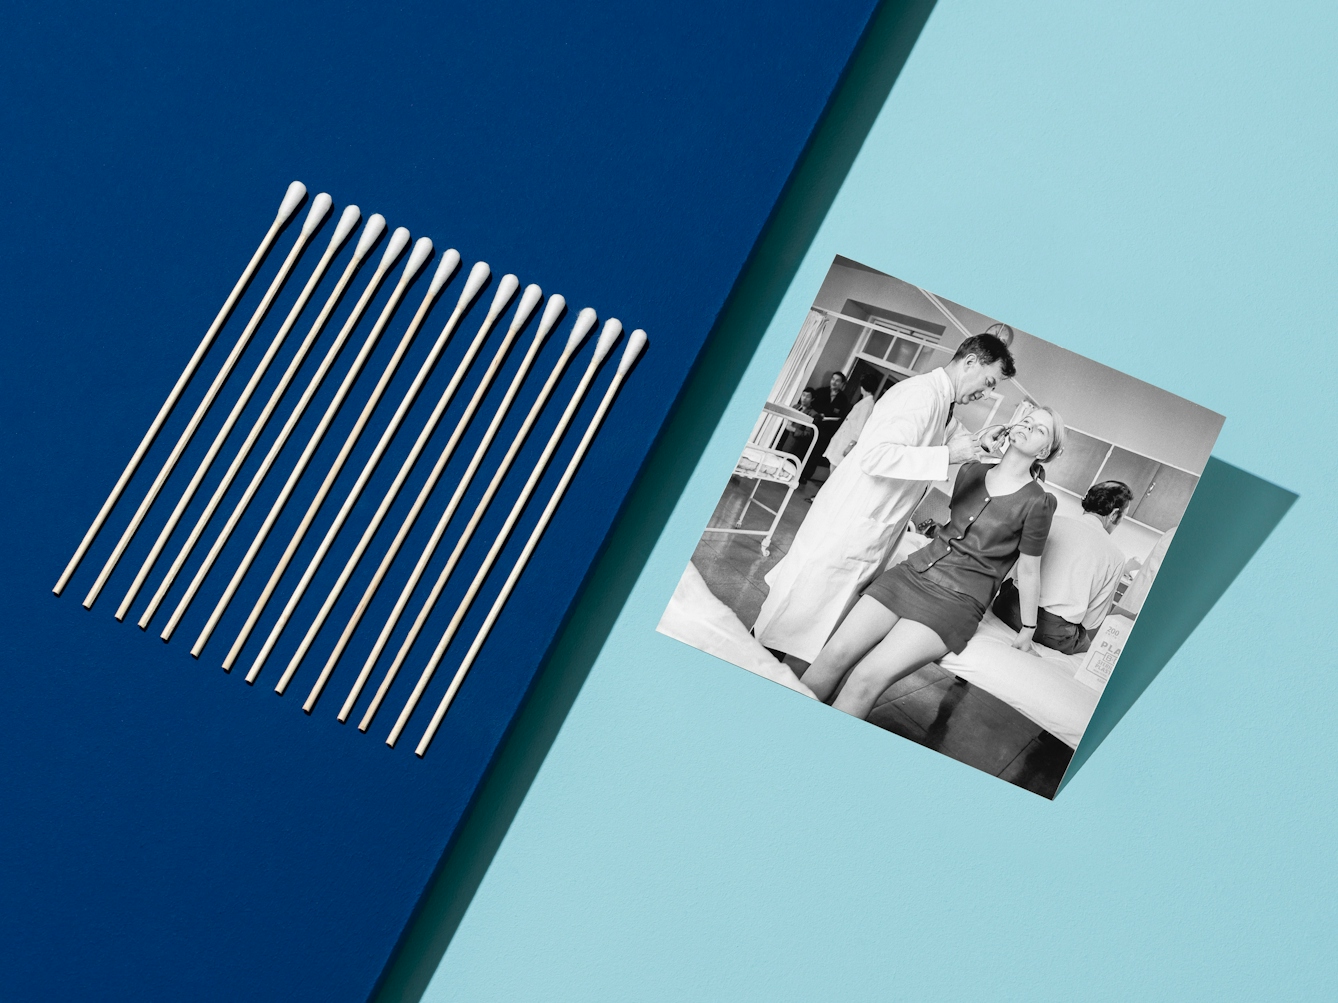 Photograph of clinical light blue background with a light blue surface floating above the dark blue and appearing from the left hand side, covering half the image. Propped up on the light blue surface is a black and white archive photograph showing a woman perched on the edge of a hospital bed whilst a male doctor administers an anti-flu vaccine up her nose. On the left hand side of the image is a row of neatly lined up medical swabs.